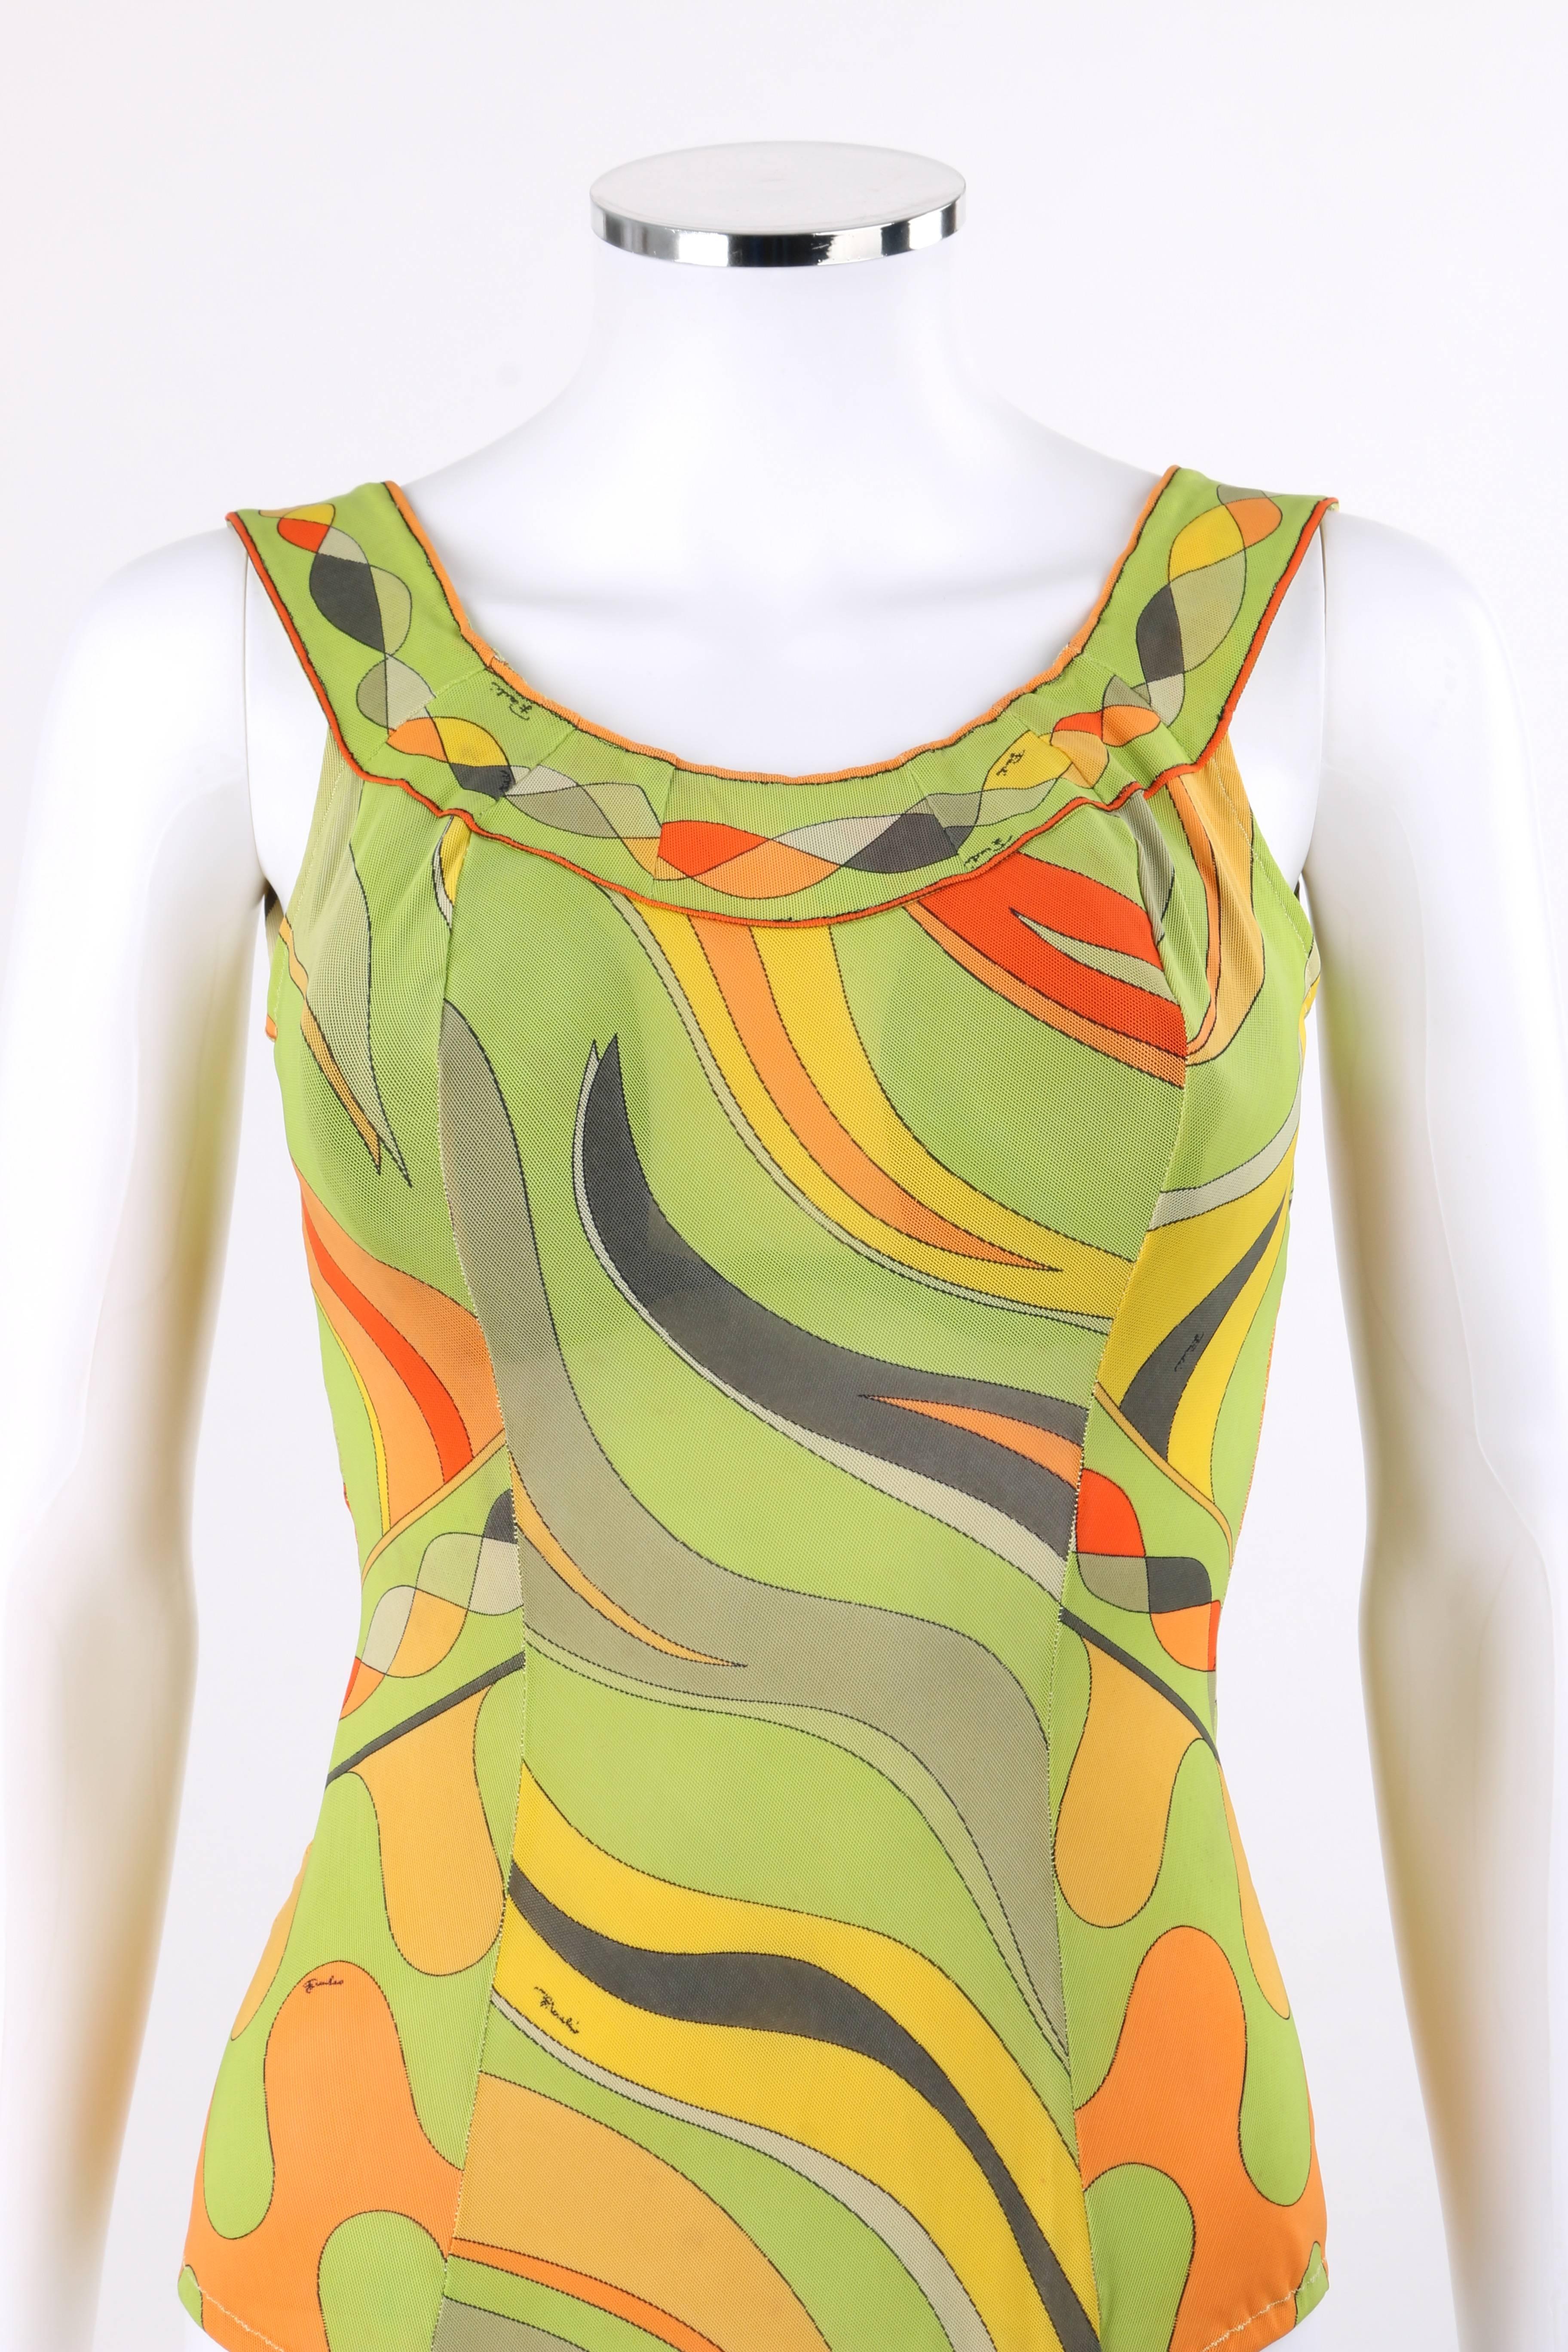 Vintage Emilio Pucci c.1960's op art signature print one piece bathing suit. Multicolor op art signature print mesh lycra in shades of green, yellow, orange, and gray. Front scoop neckline. Low open back. Boarder print detail along neckline and from